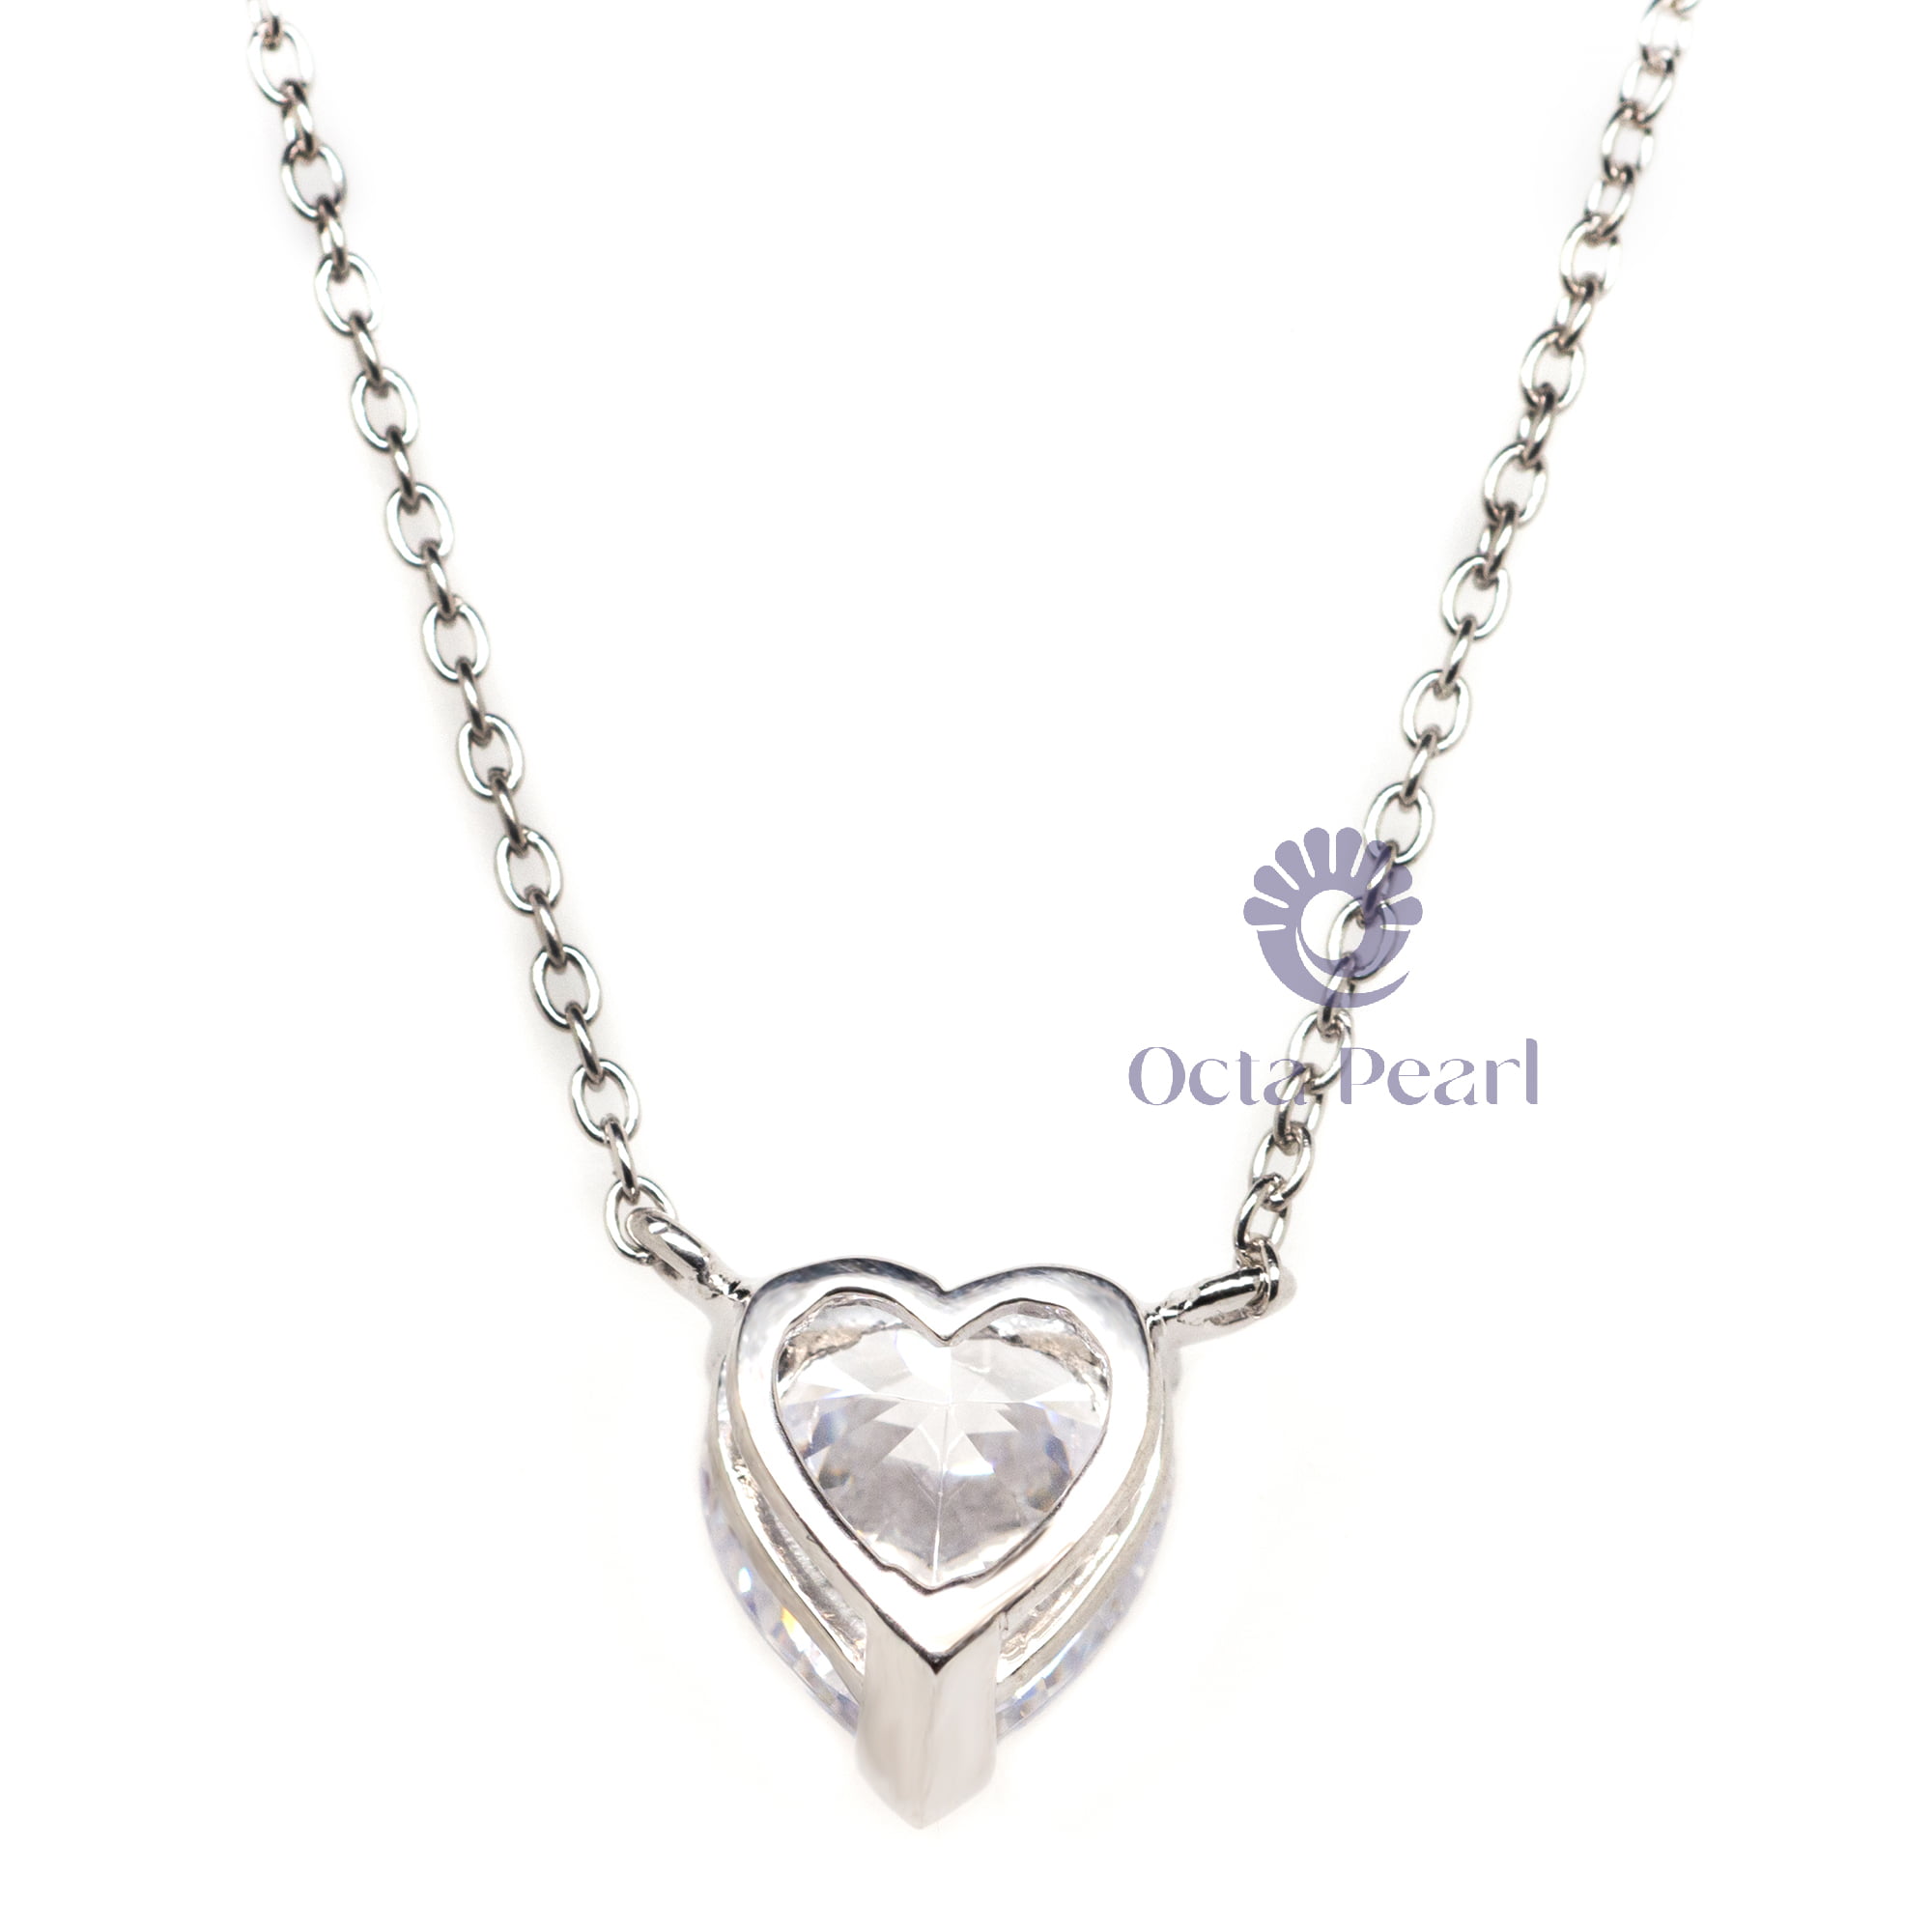 Women's 9 MM Heart Cut White CZ Stone 925 Silver Gorgeous Beautiful Pendant Necklace For Valentine's Gift